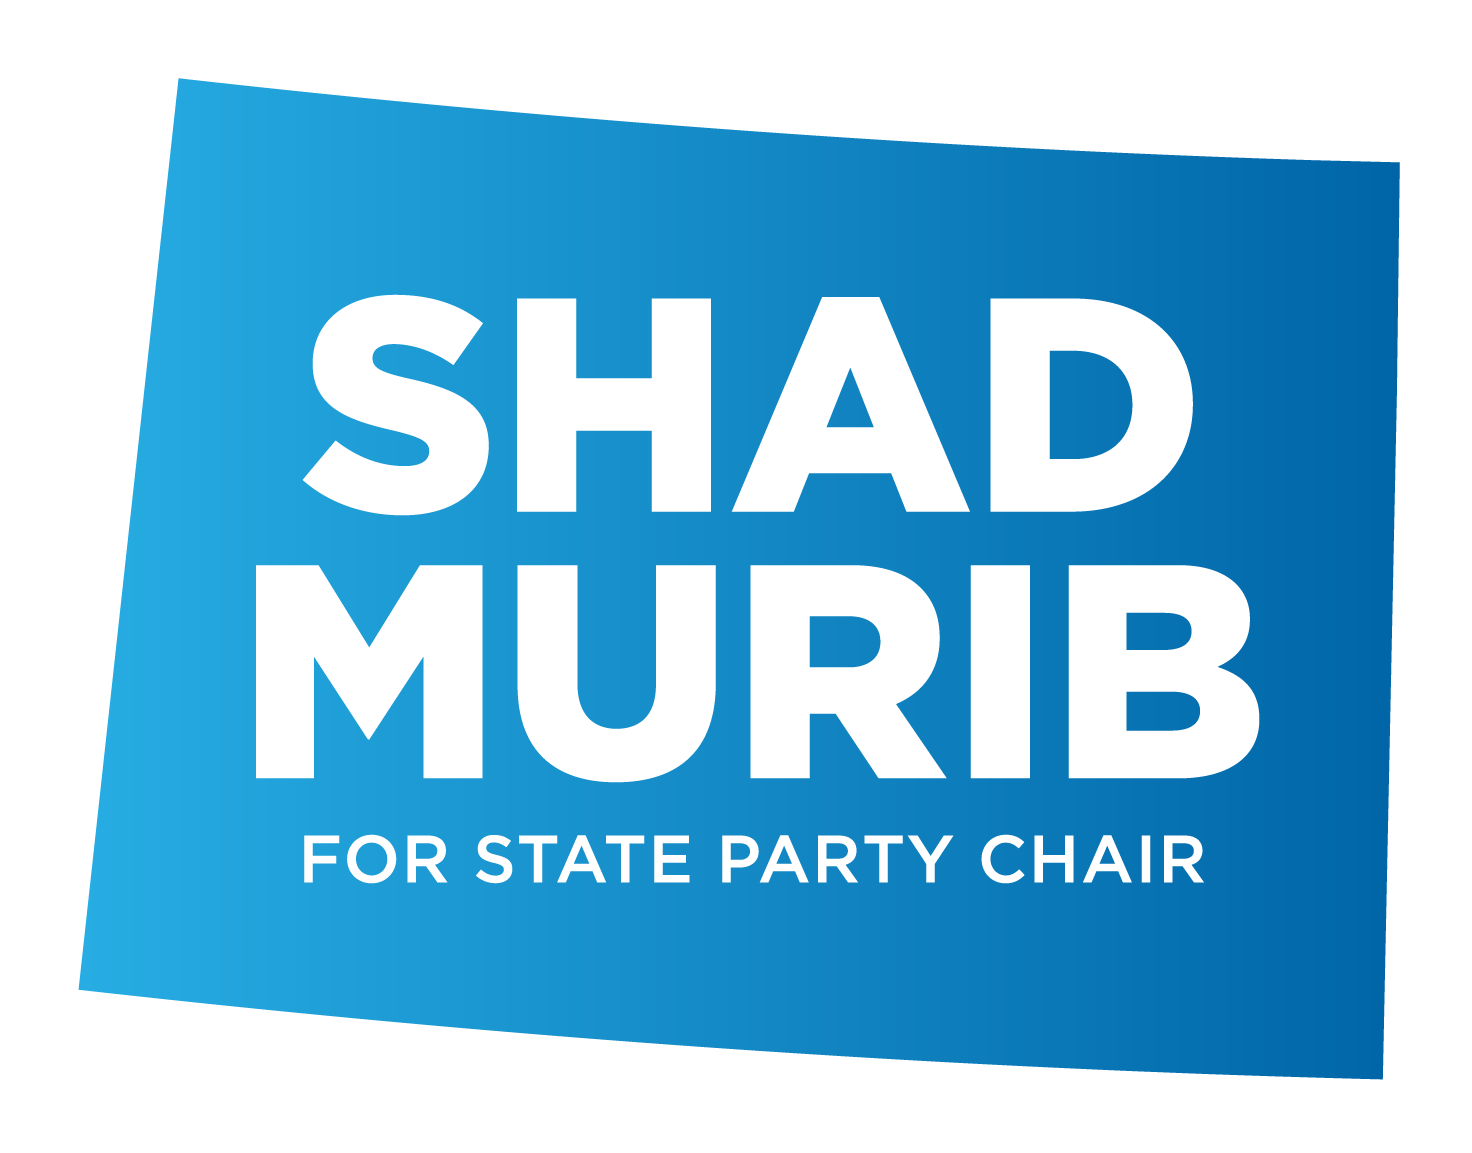 Shad Murib for Chair